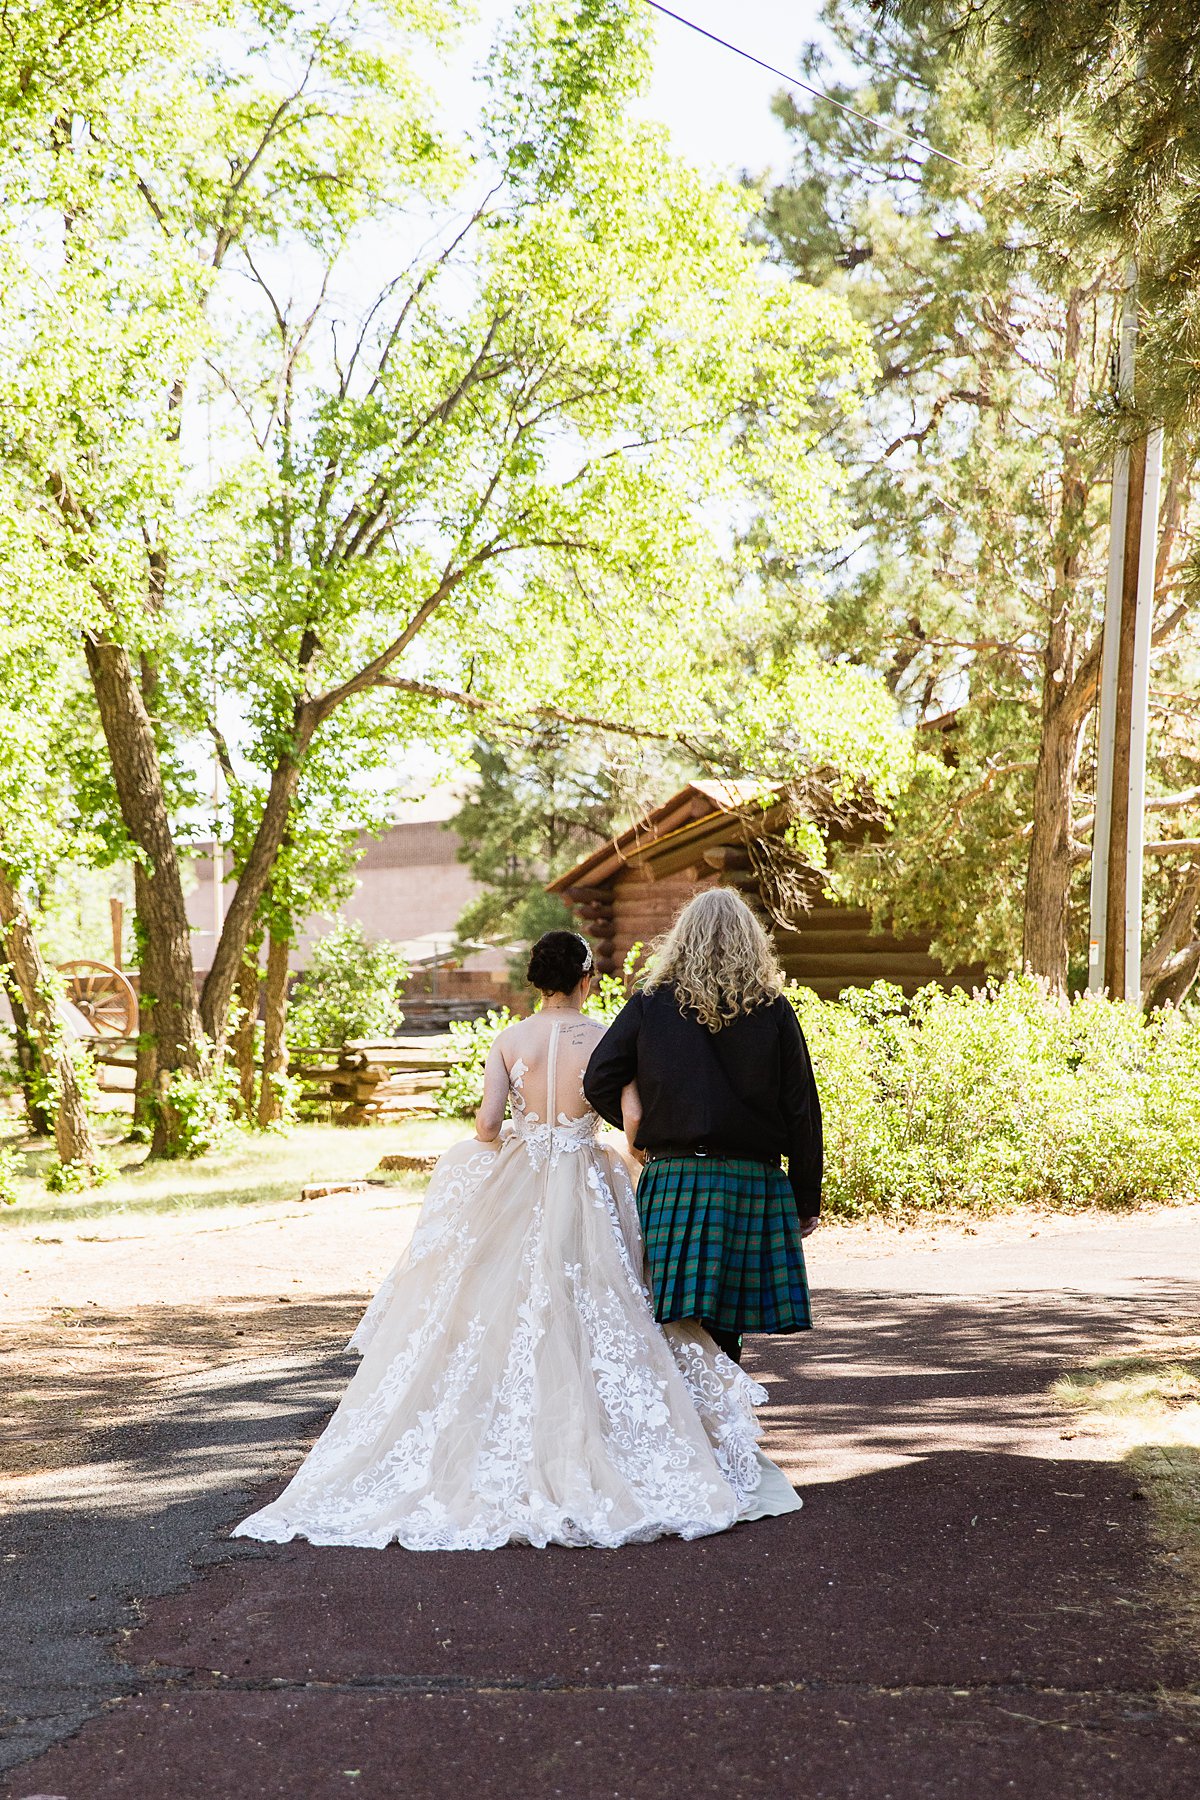 Bride and groom walk together in the woods at the Riordan Mansion at their Scottish and Sunflower inspired wedding by Flagstaff wedding photographers PMA Photography.